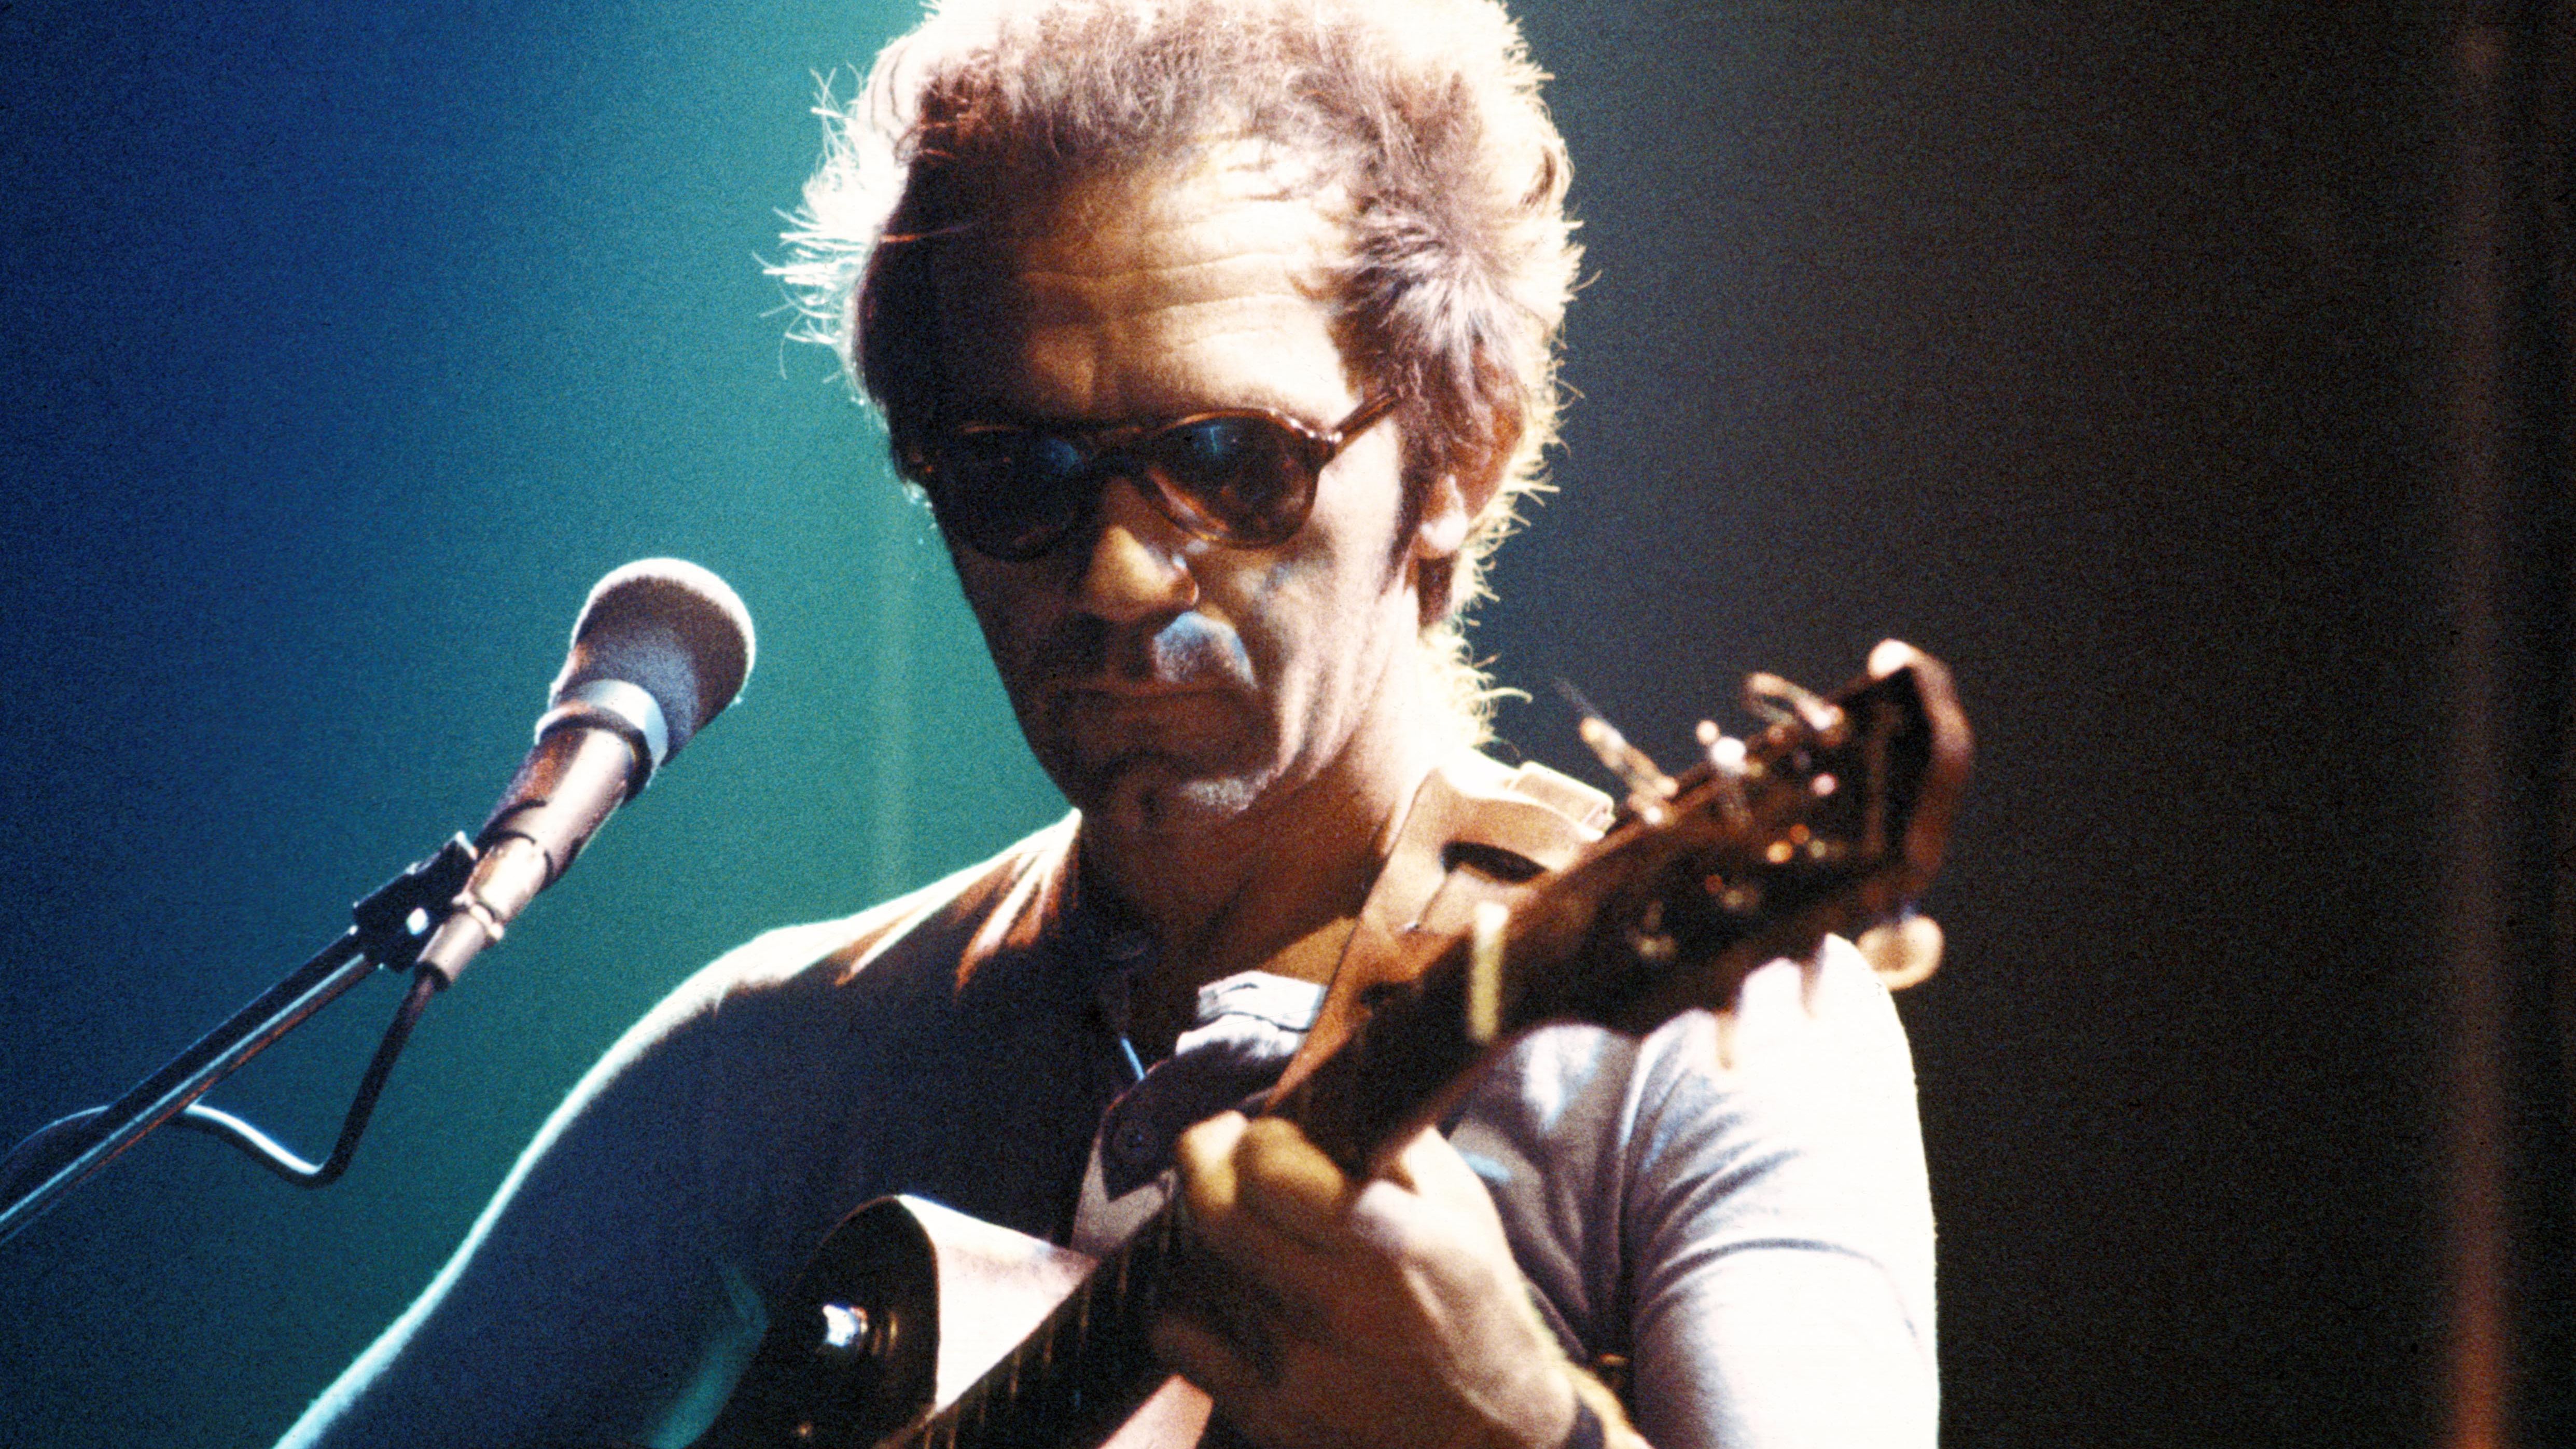 Writer of hits JJ Cale dead at 74, rep says